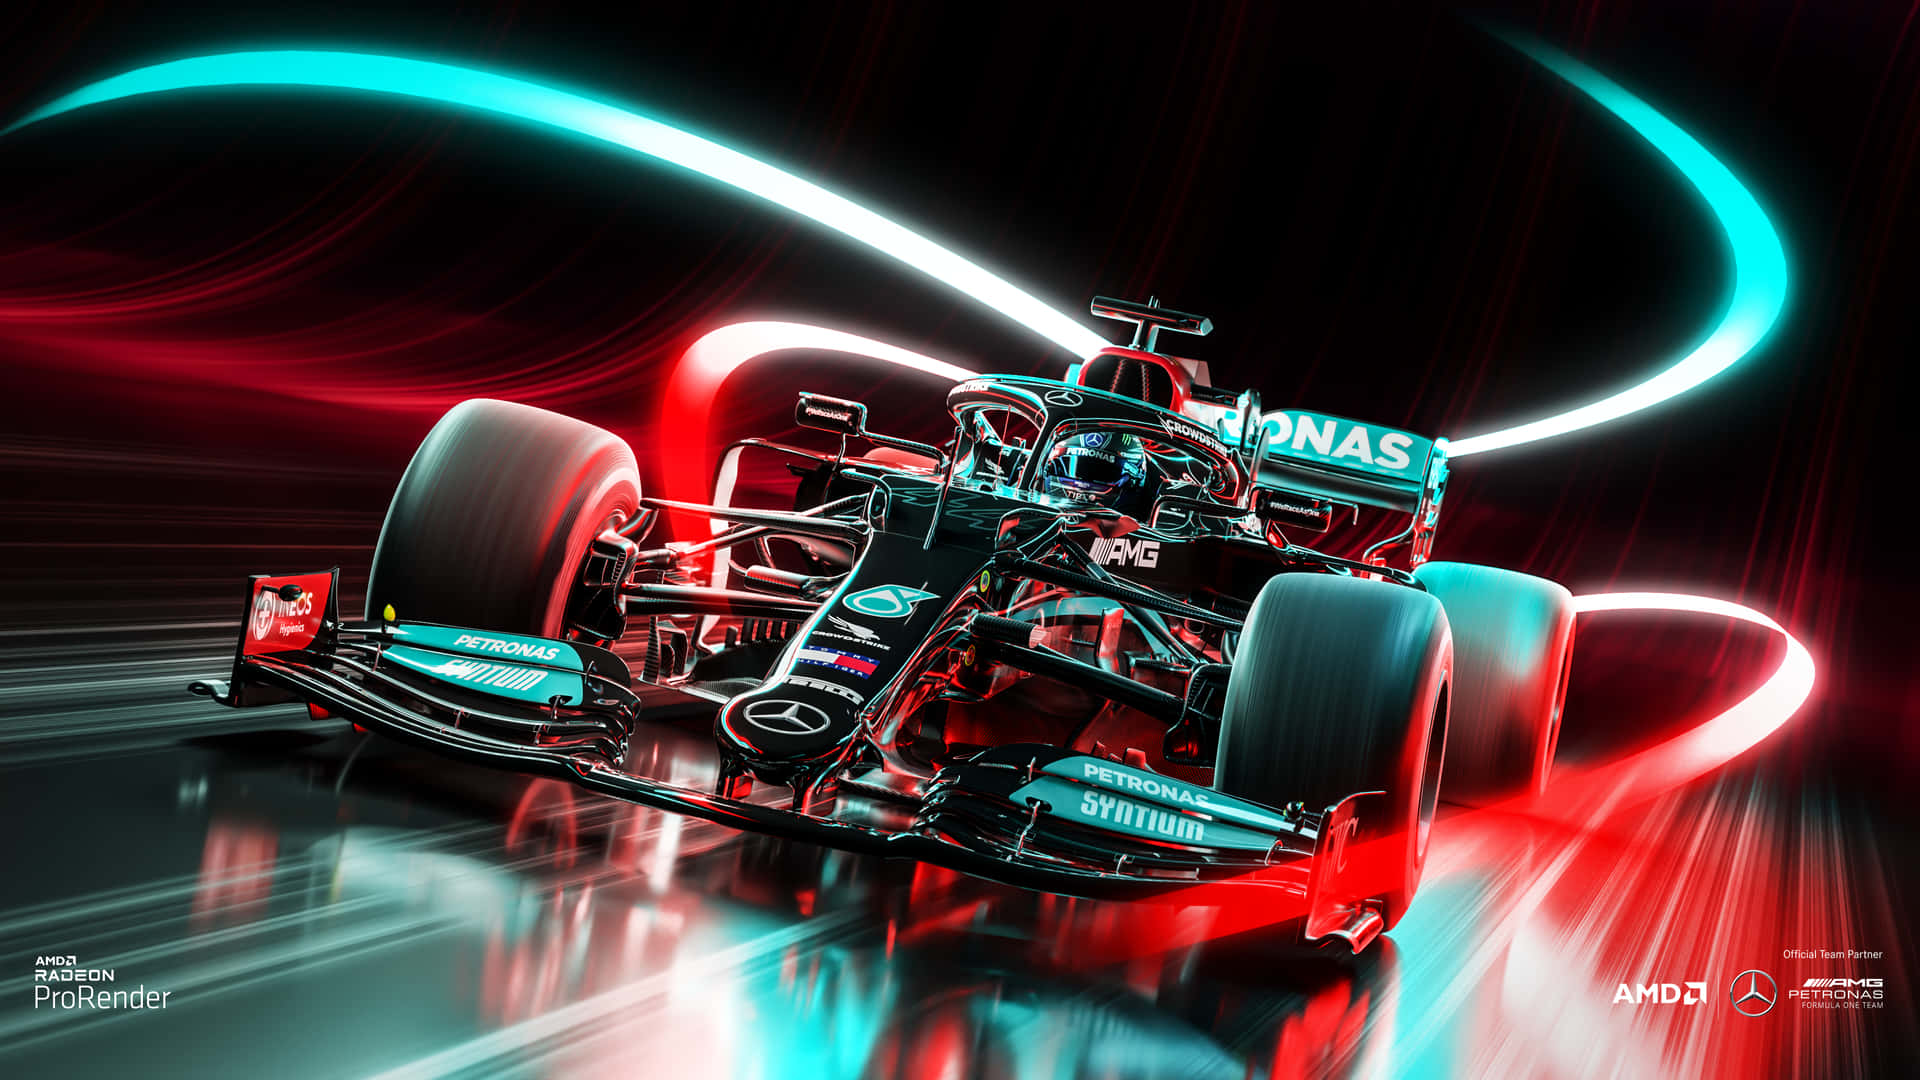 A Mercedes F1 Car Is Driving Through The Night Wallpaper